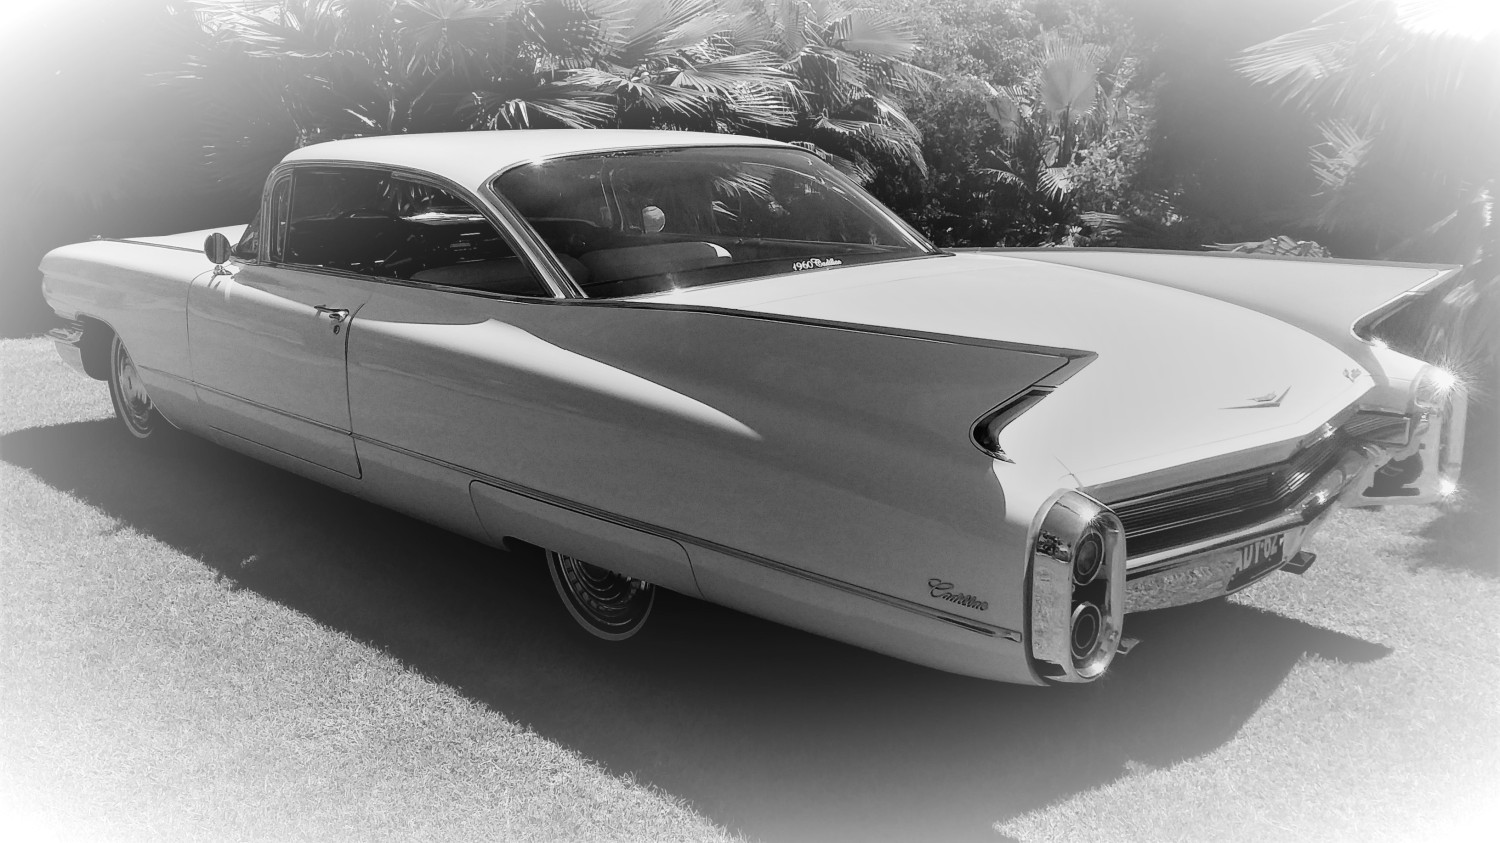 1960 Cadillac Coupe Series 62